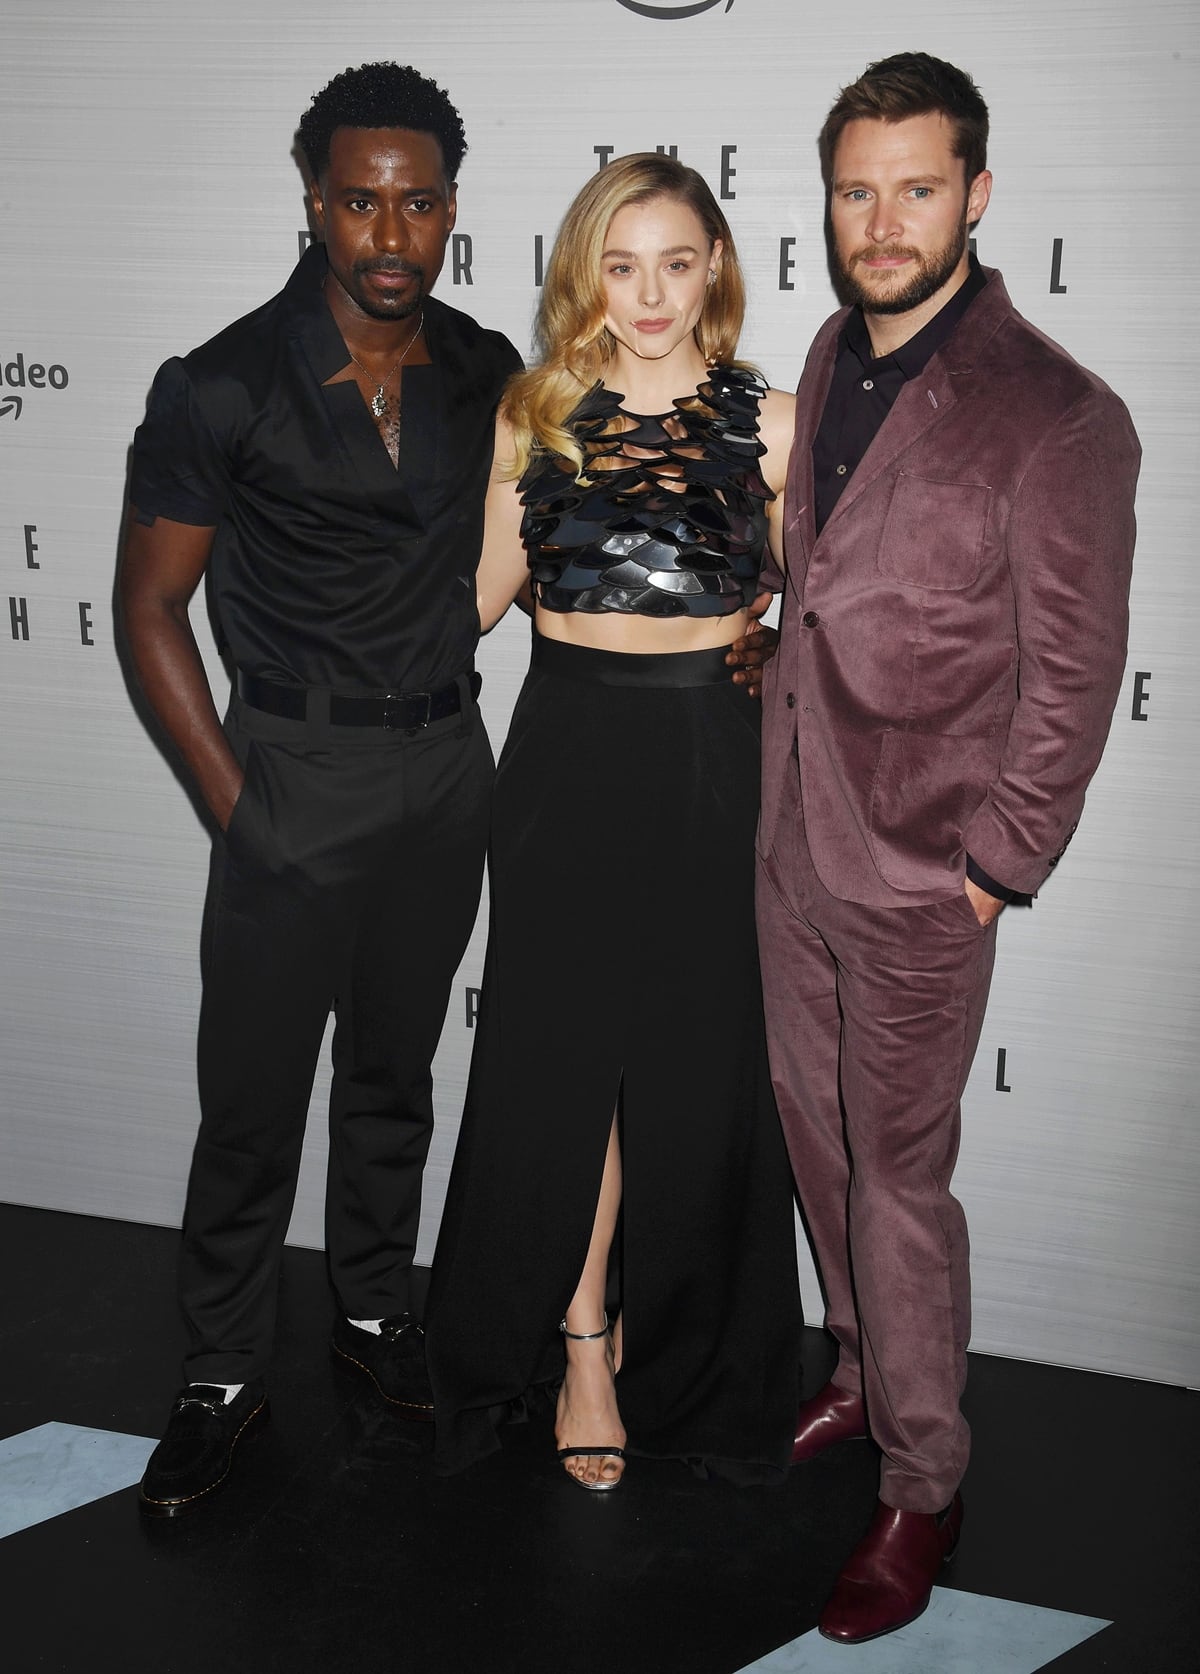 Gary Carr, Chloë Grace Moretz, and Jack Reynor attend "The Peripheral" red carpet premiere and screening